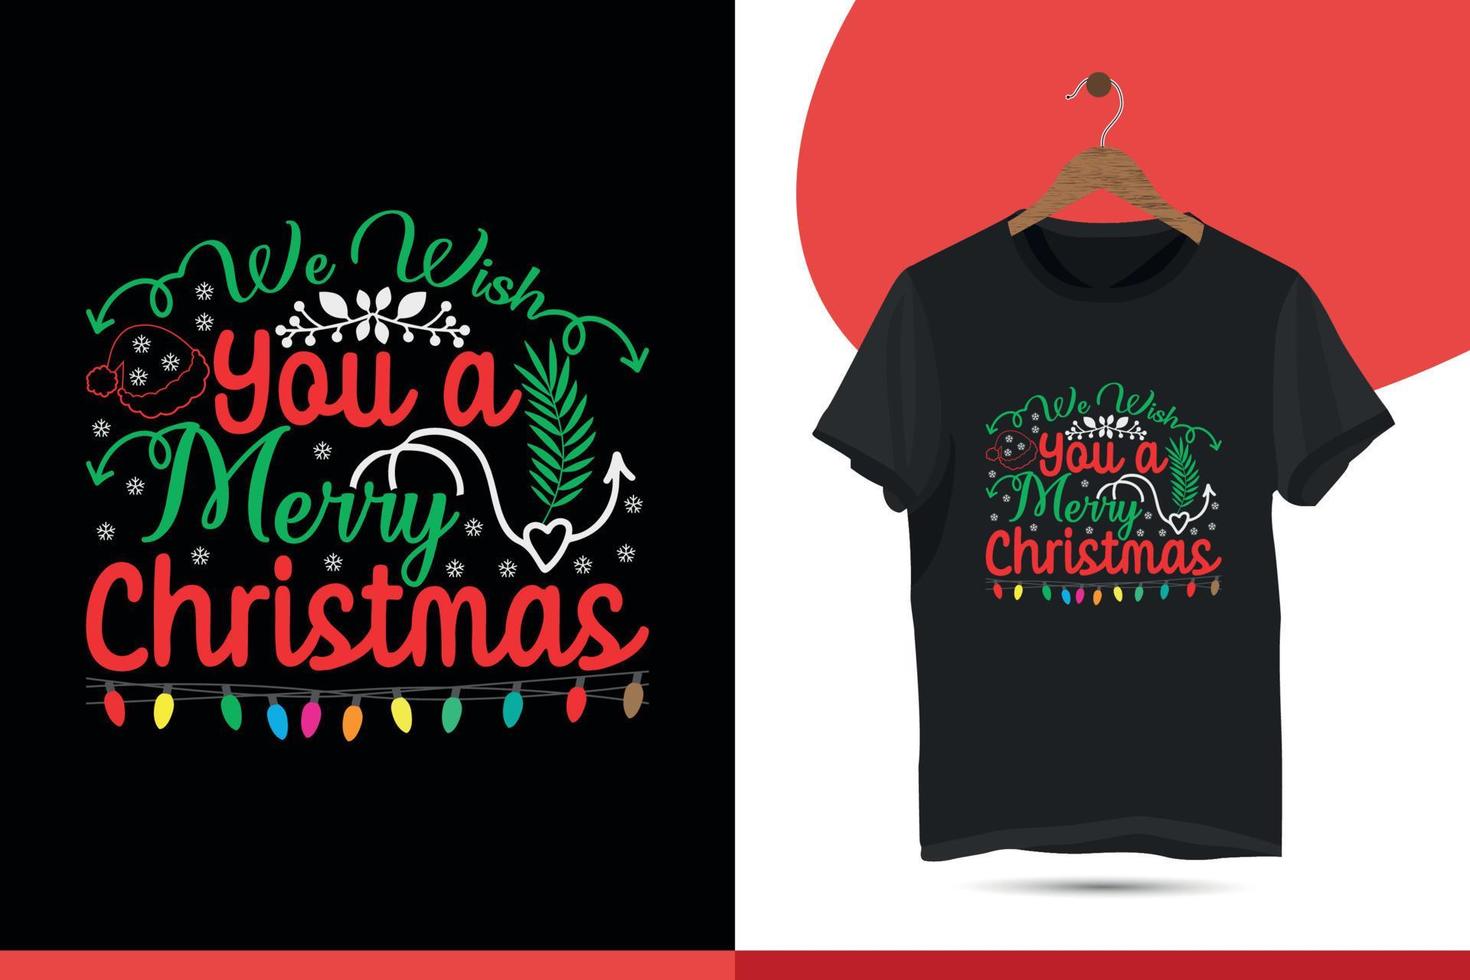 We wish you a Merry Christmas - Best Typography Vector t-shirt Design for Christmas Festival Season.